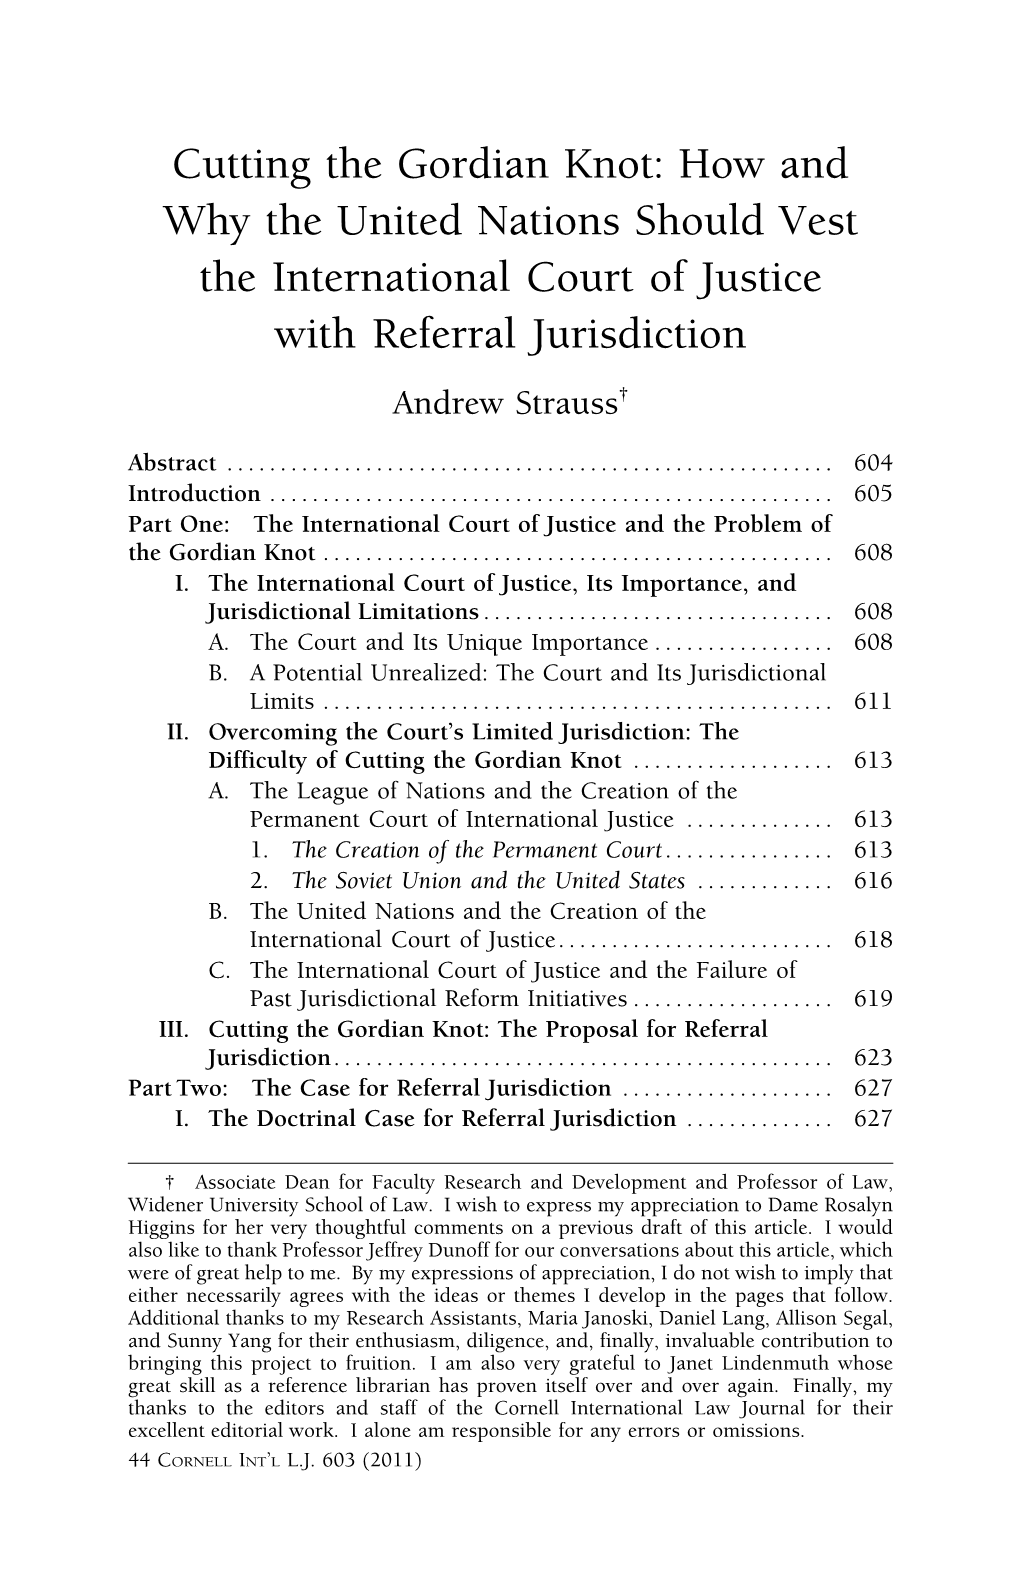 Cutting the Gordian Knot: How and Why the United Nations Should Vest the International Court of Justice with Referral Jurisdiction Andrew Strauss†